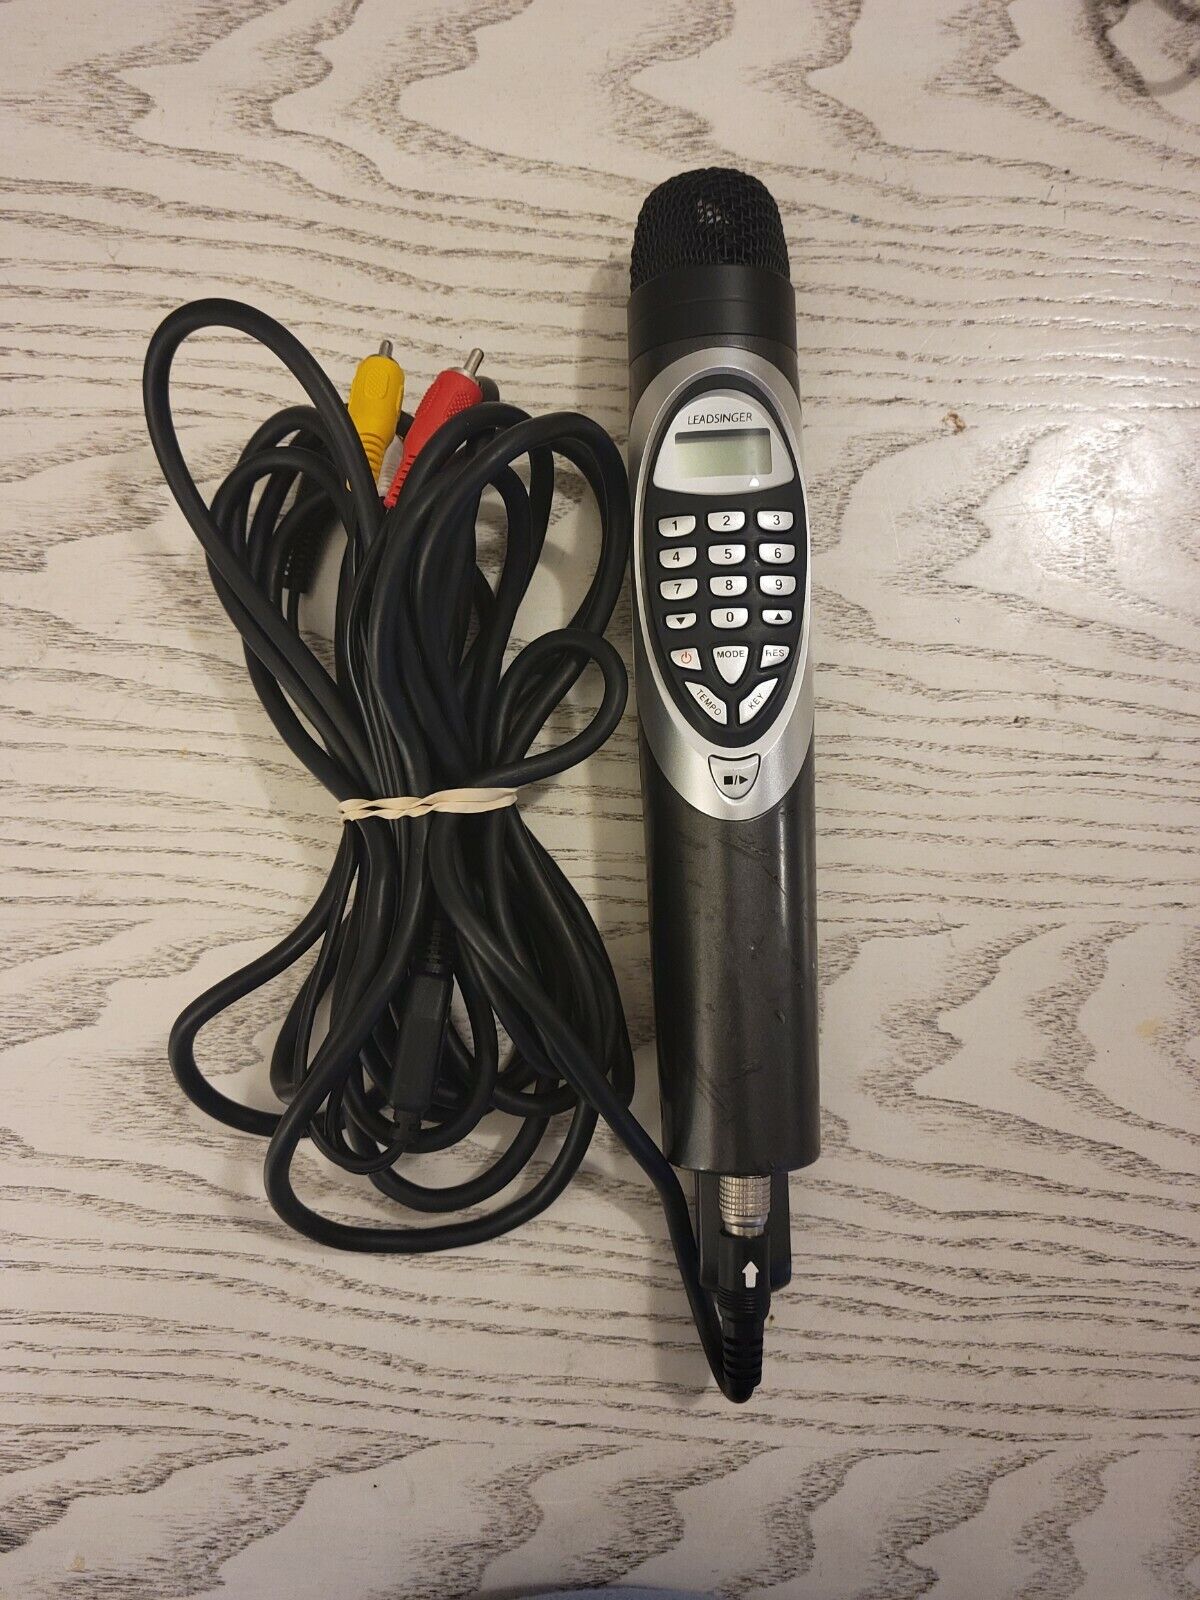 Leadsinger LS-3000 Mic Wholesale Los Angeles Mall Microphone TV Karaoke Song Or Chips - No